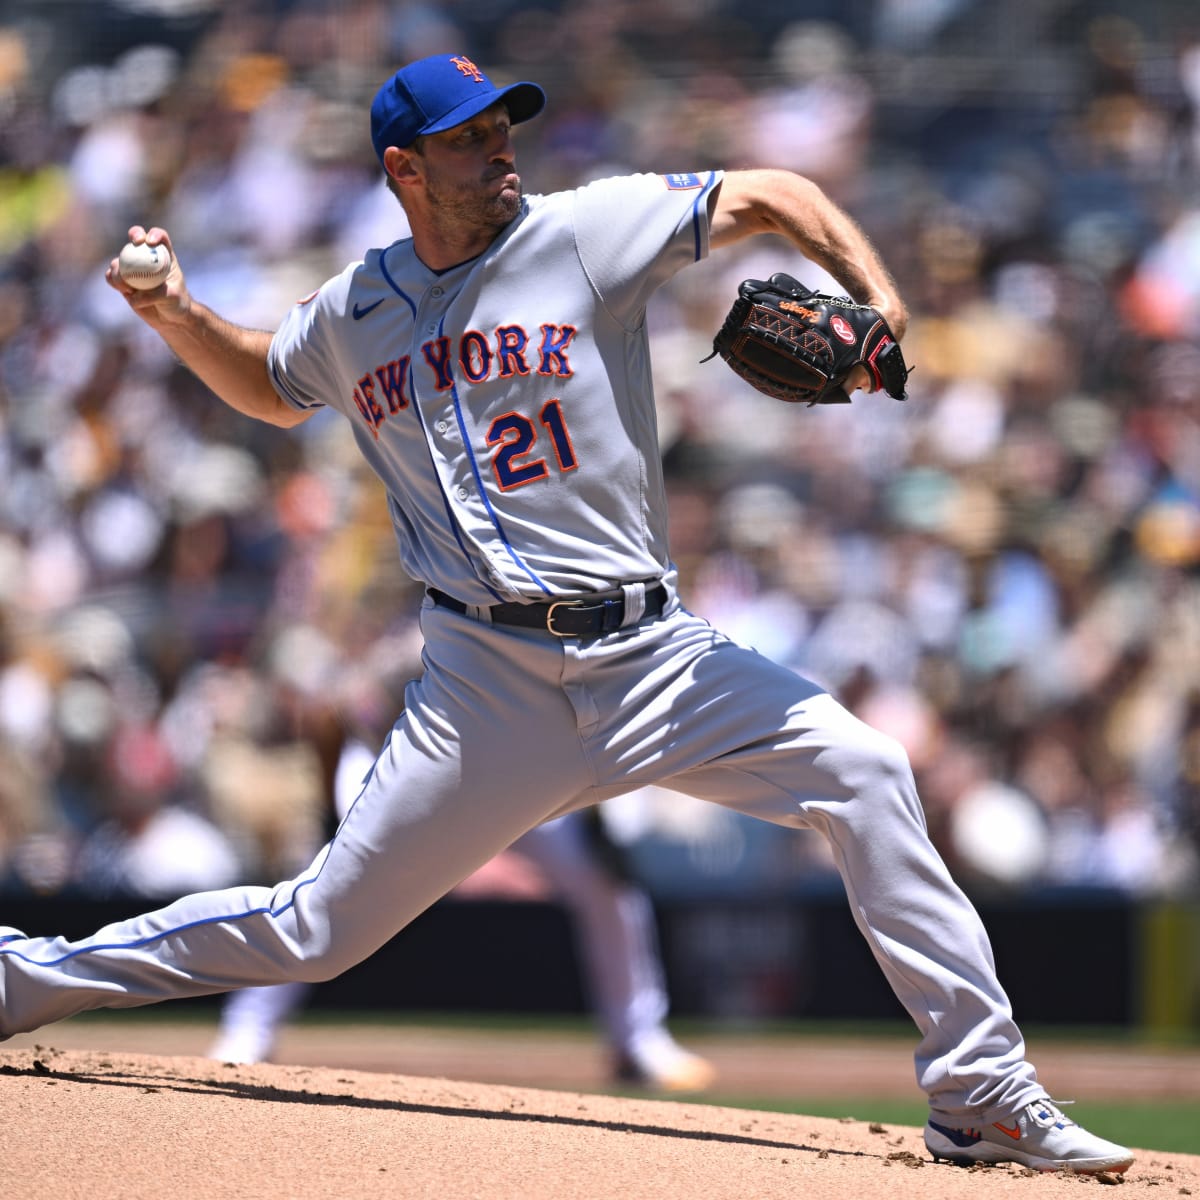 Mets, Max Scherzer hoping latest IL stint gets the ace ready for October